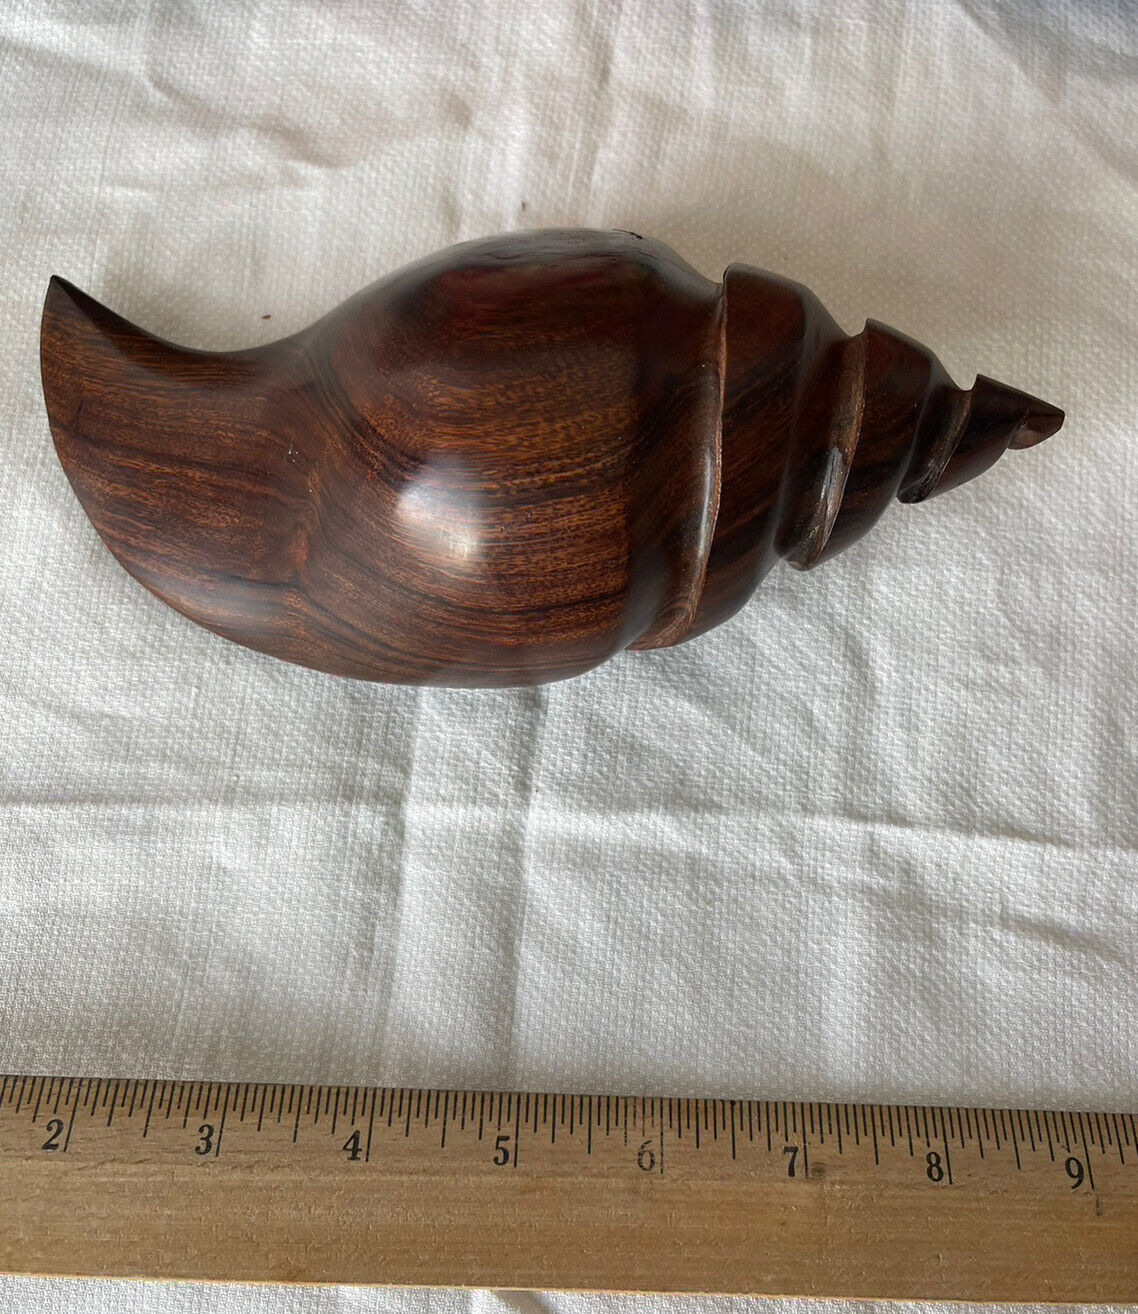 VTG MCM Handcrafted Carved Wood Snail Forestcore Cottagecore Beach Figure Decor